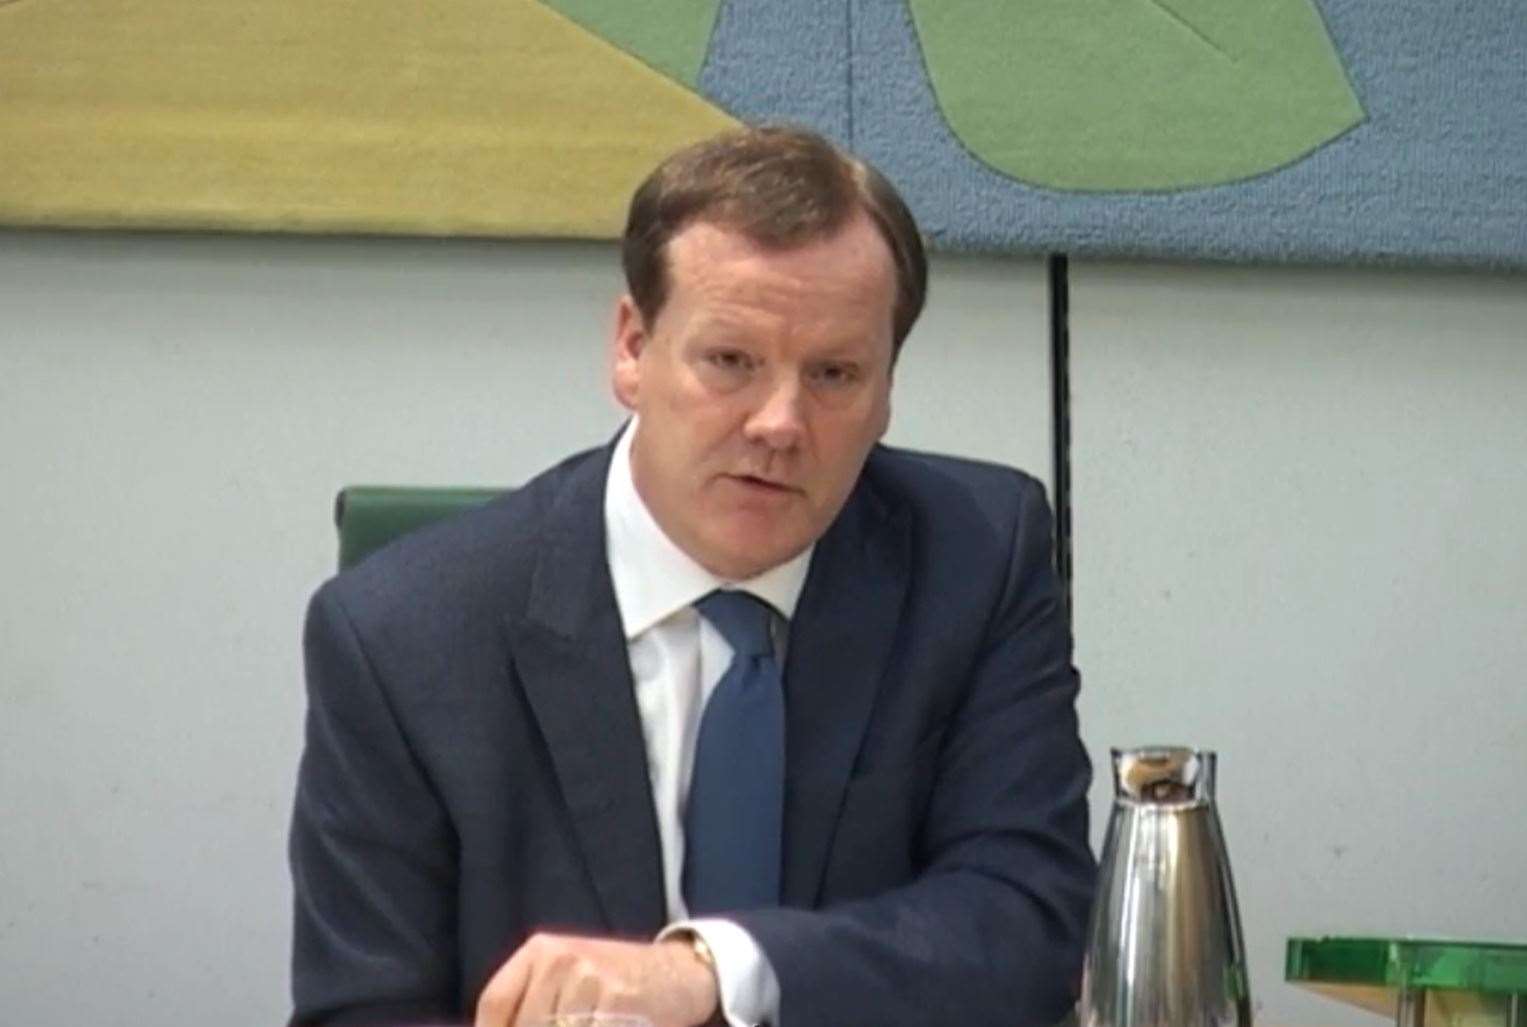 Charlie Elphicke Picture: The Office of Charlie Elphicke MP